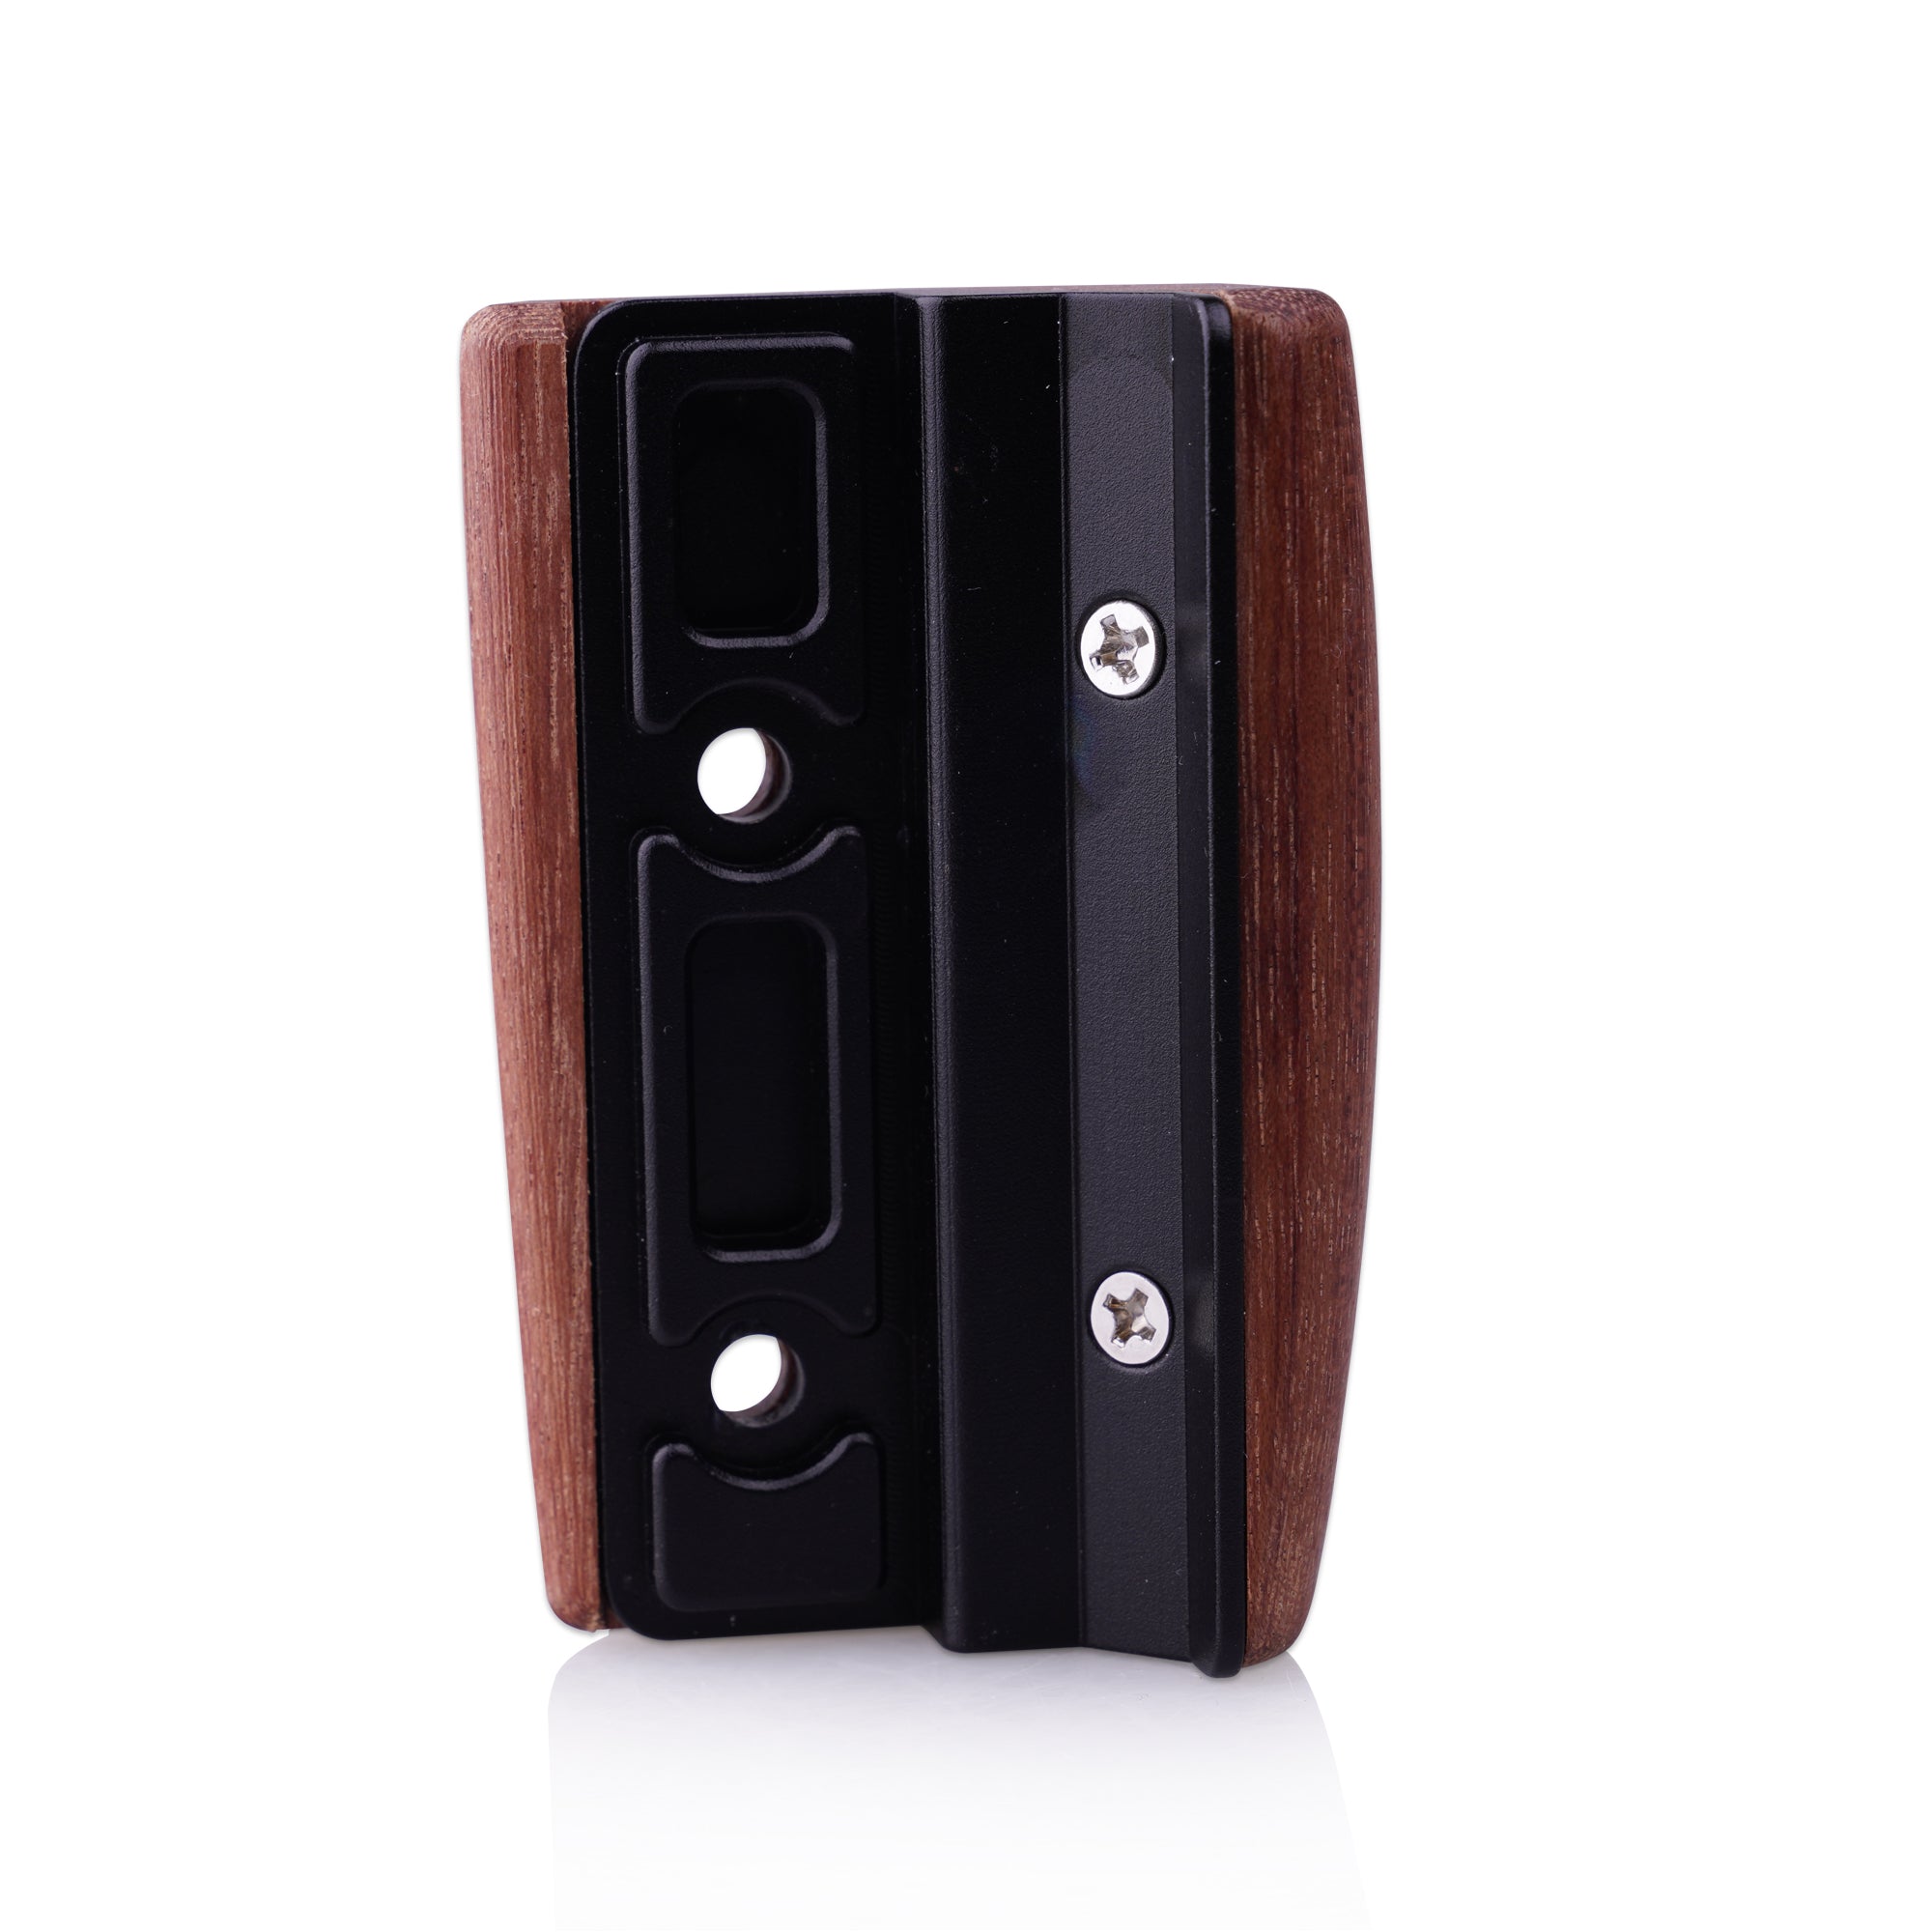 Lanhorse Left-hand Rosewood Handgrip Only for Hasselblad X2D 100C Cage